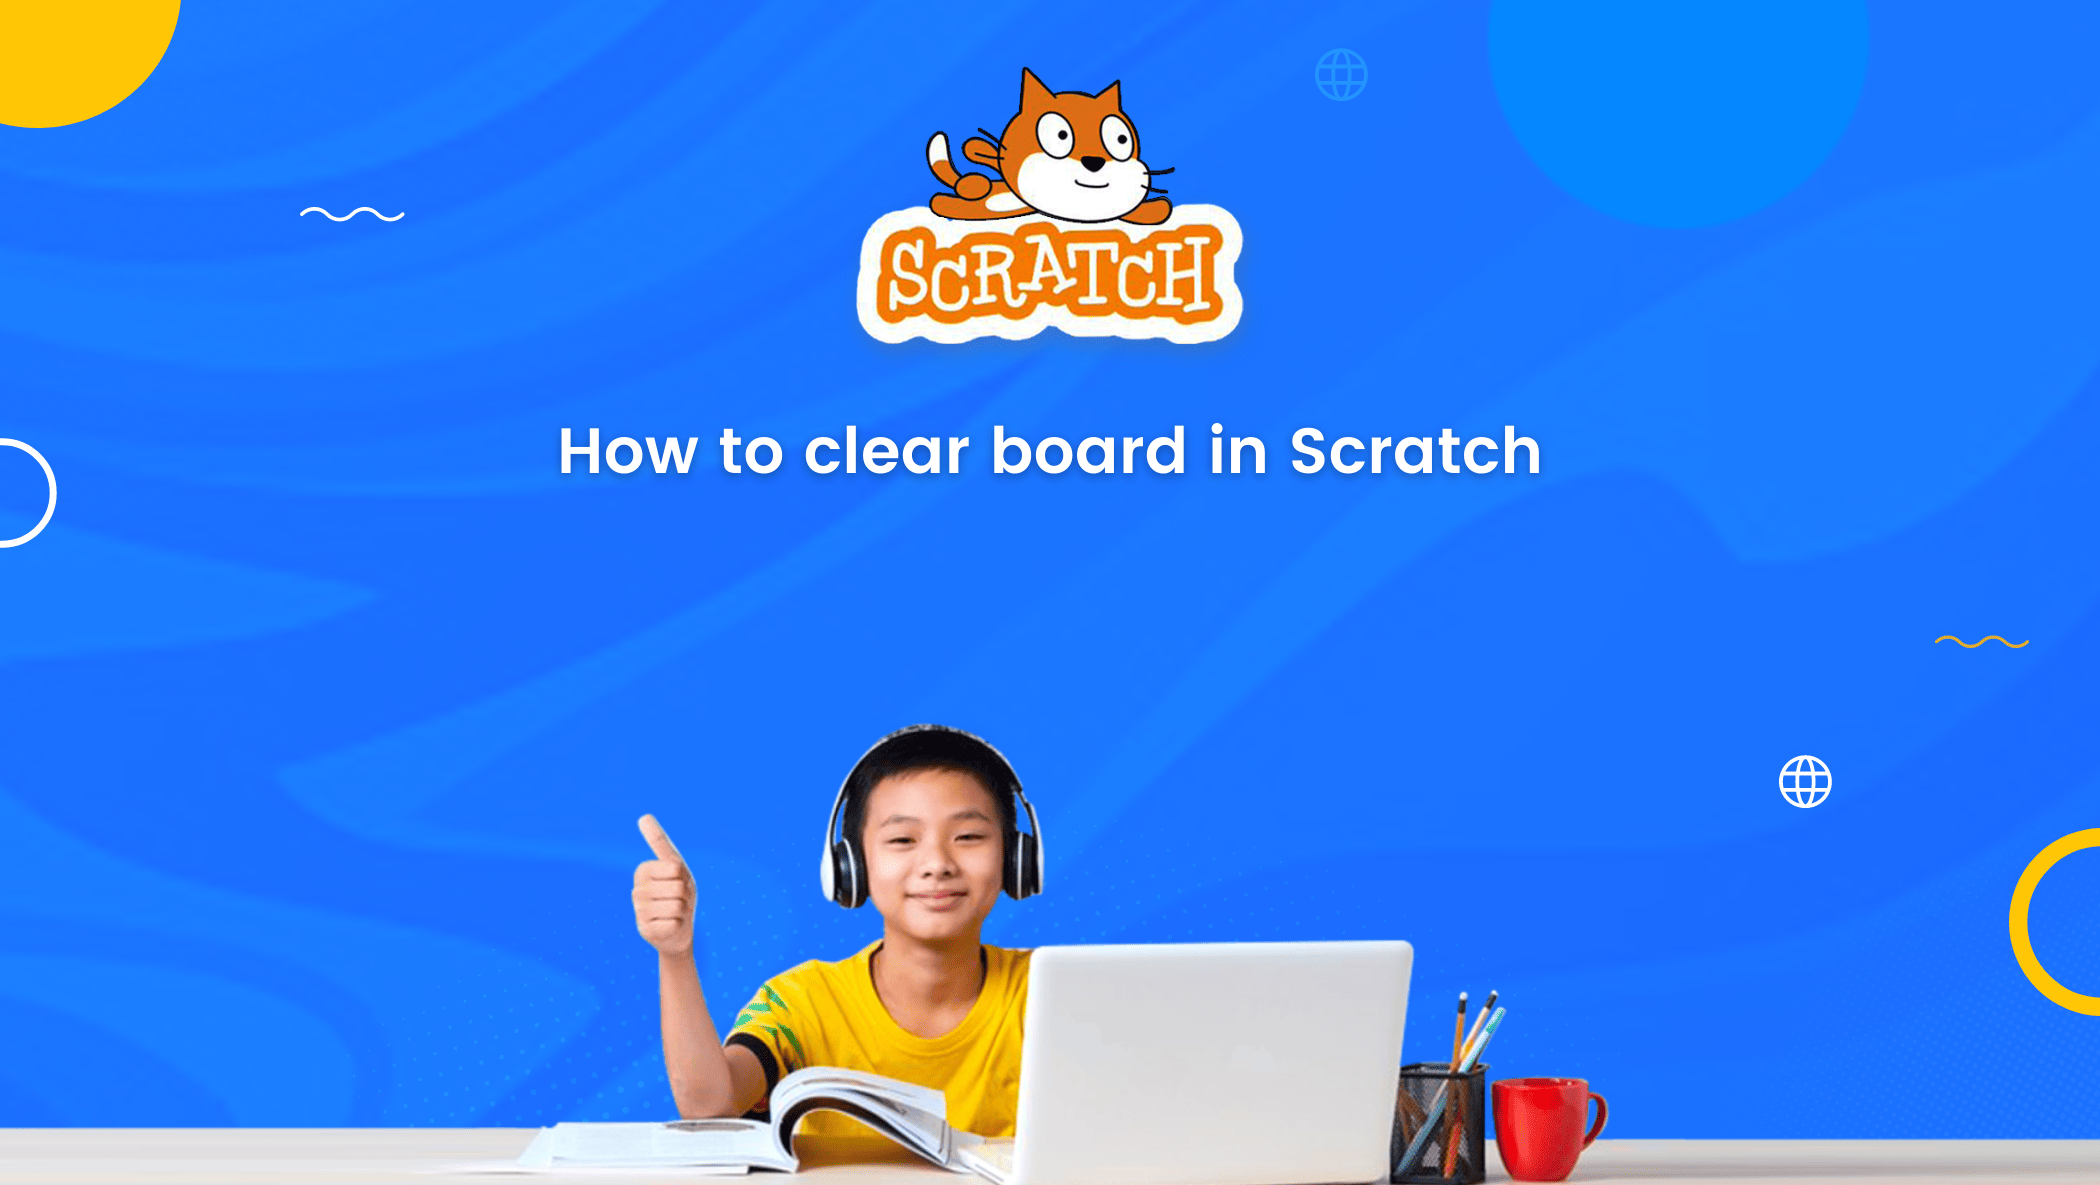 How to clear board in Scratch